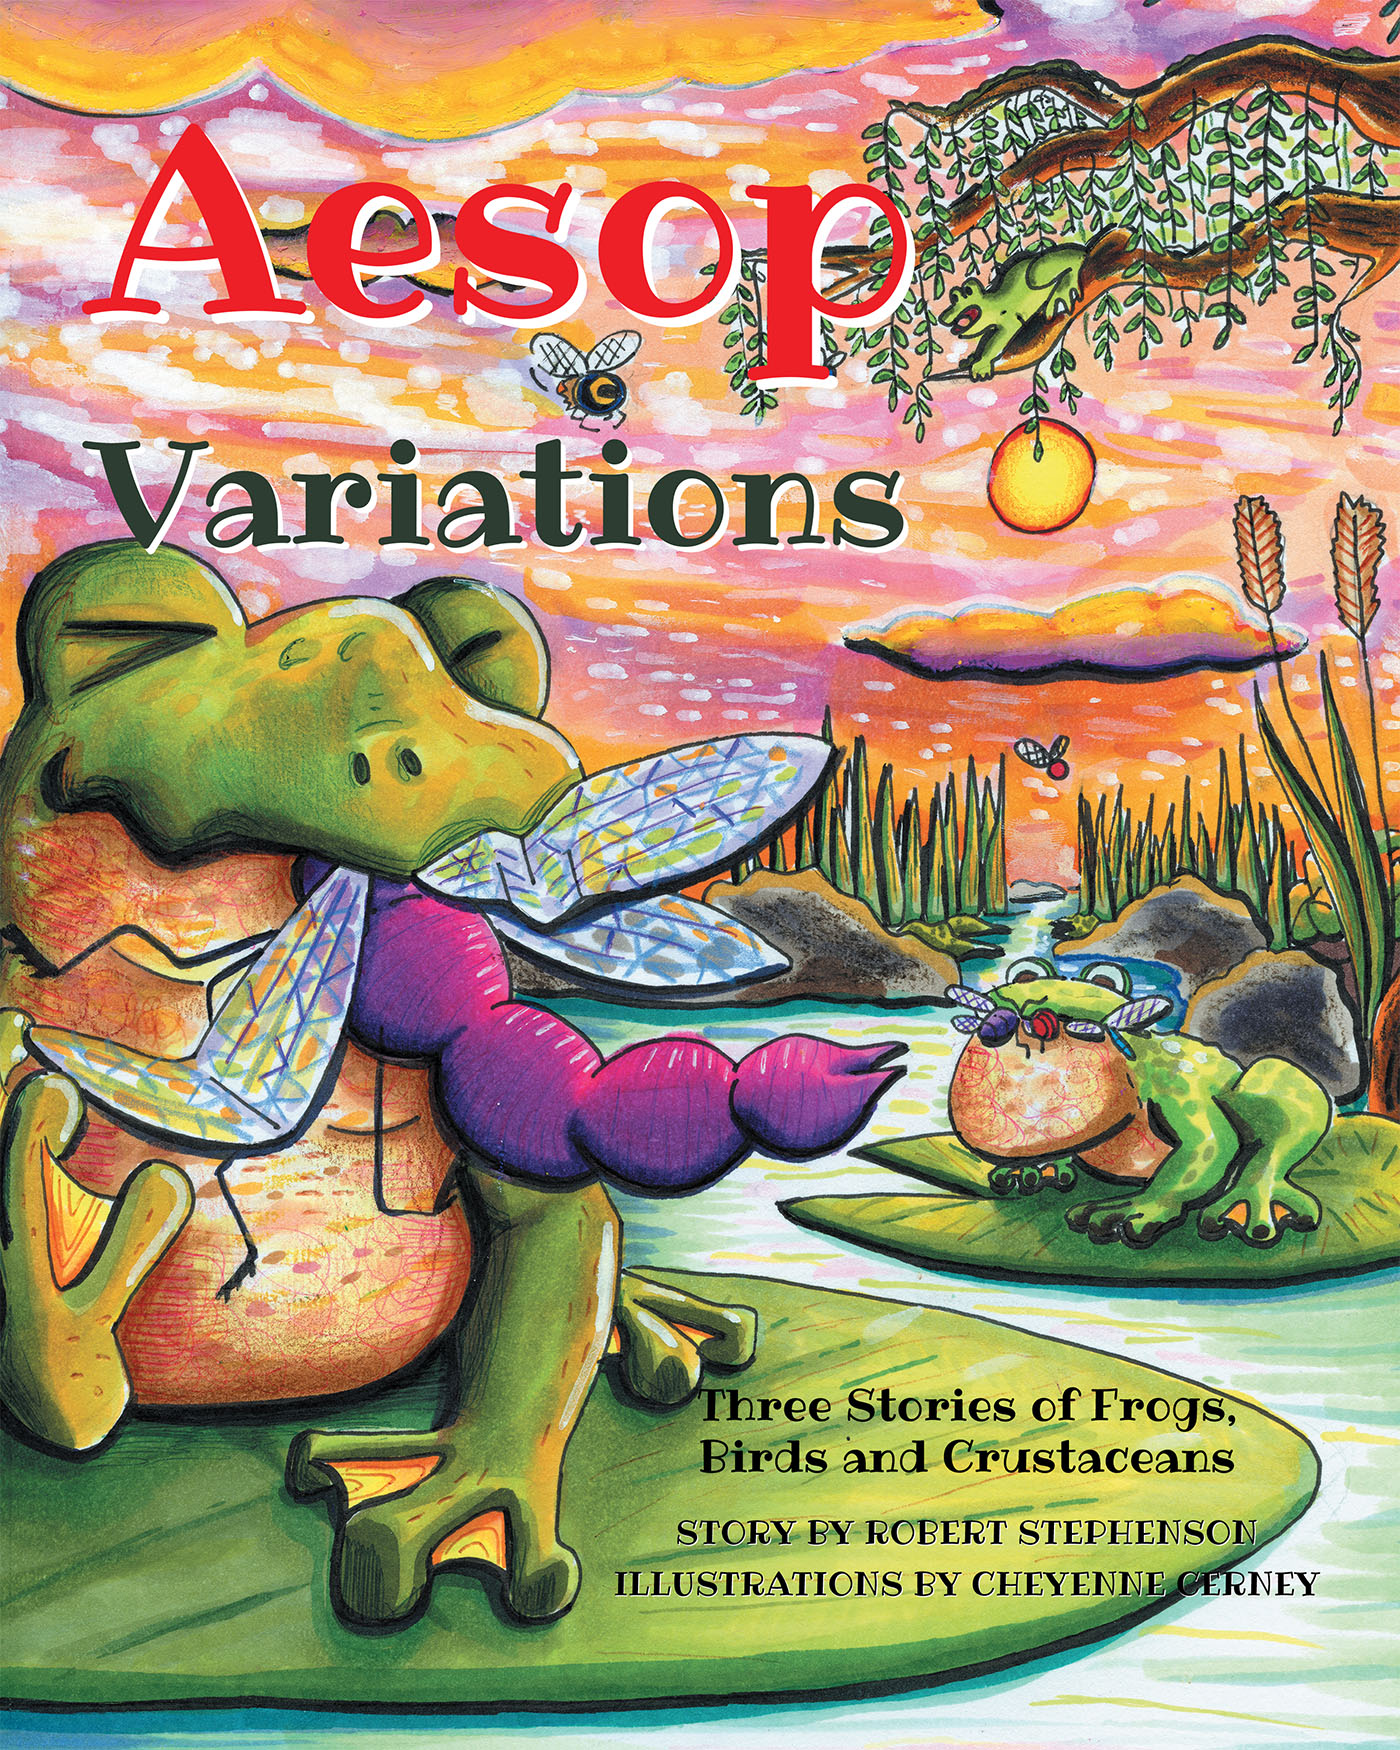 Author Robert Stephenson’s New Book, "Aesop Variations: Three Stories of Frogs, Birds and Crustaceans," Explores Different Pairings Within the Animal Kingdom